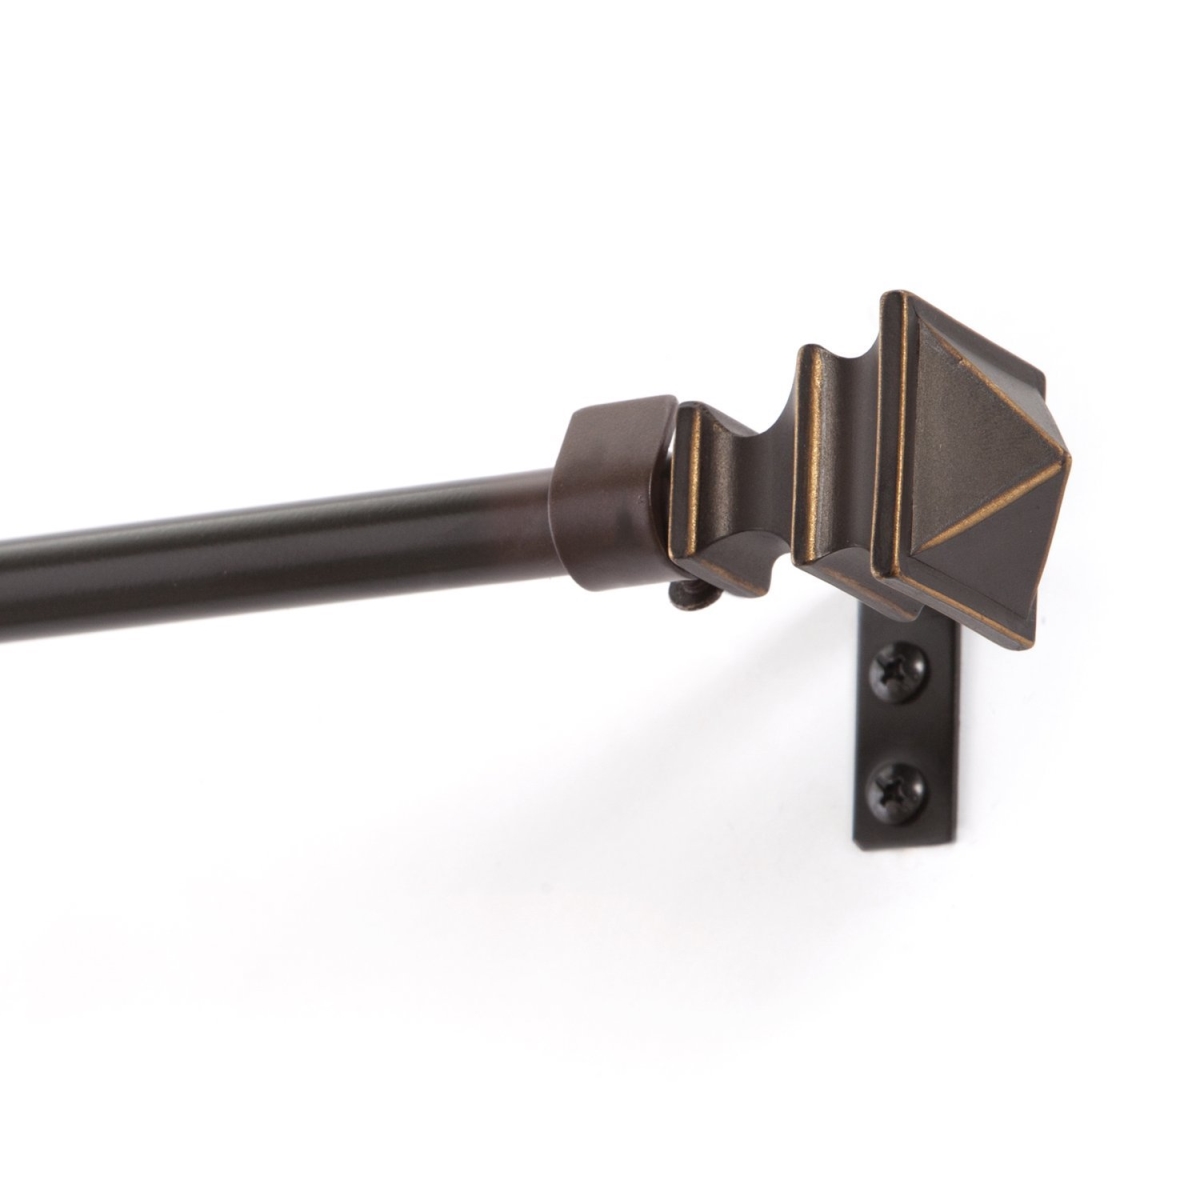 32-lwf1017-3orb 88-144 In. Painted Oil Rubbed Bronze Finish Single Rod Window Hardware With Square Resin Finial No. 3